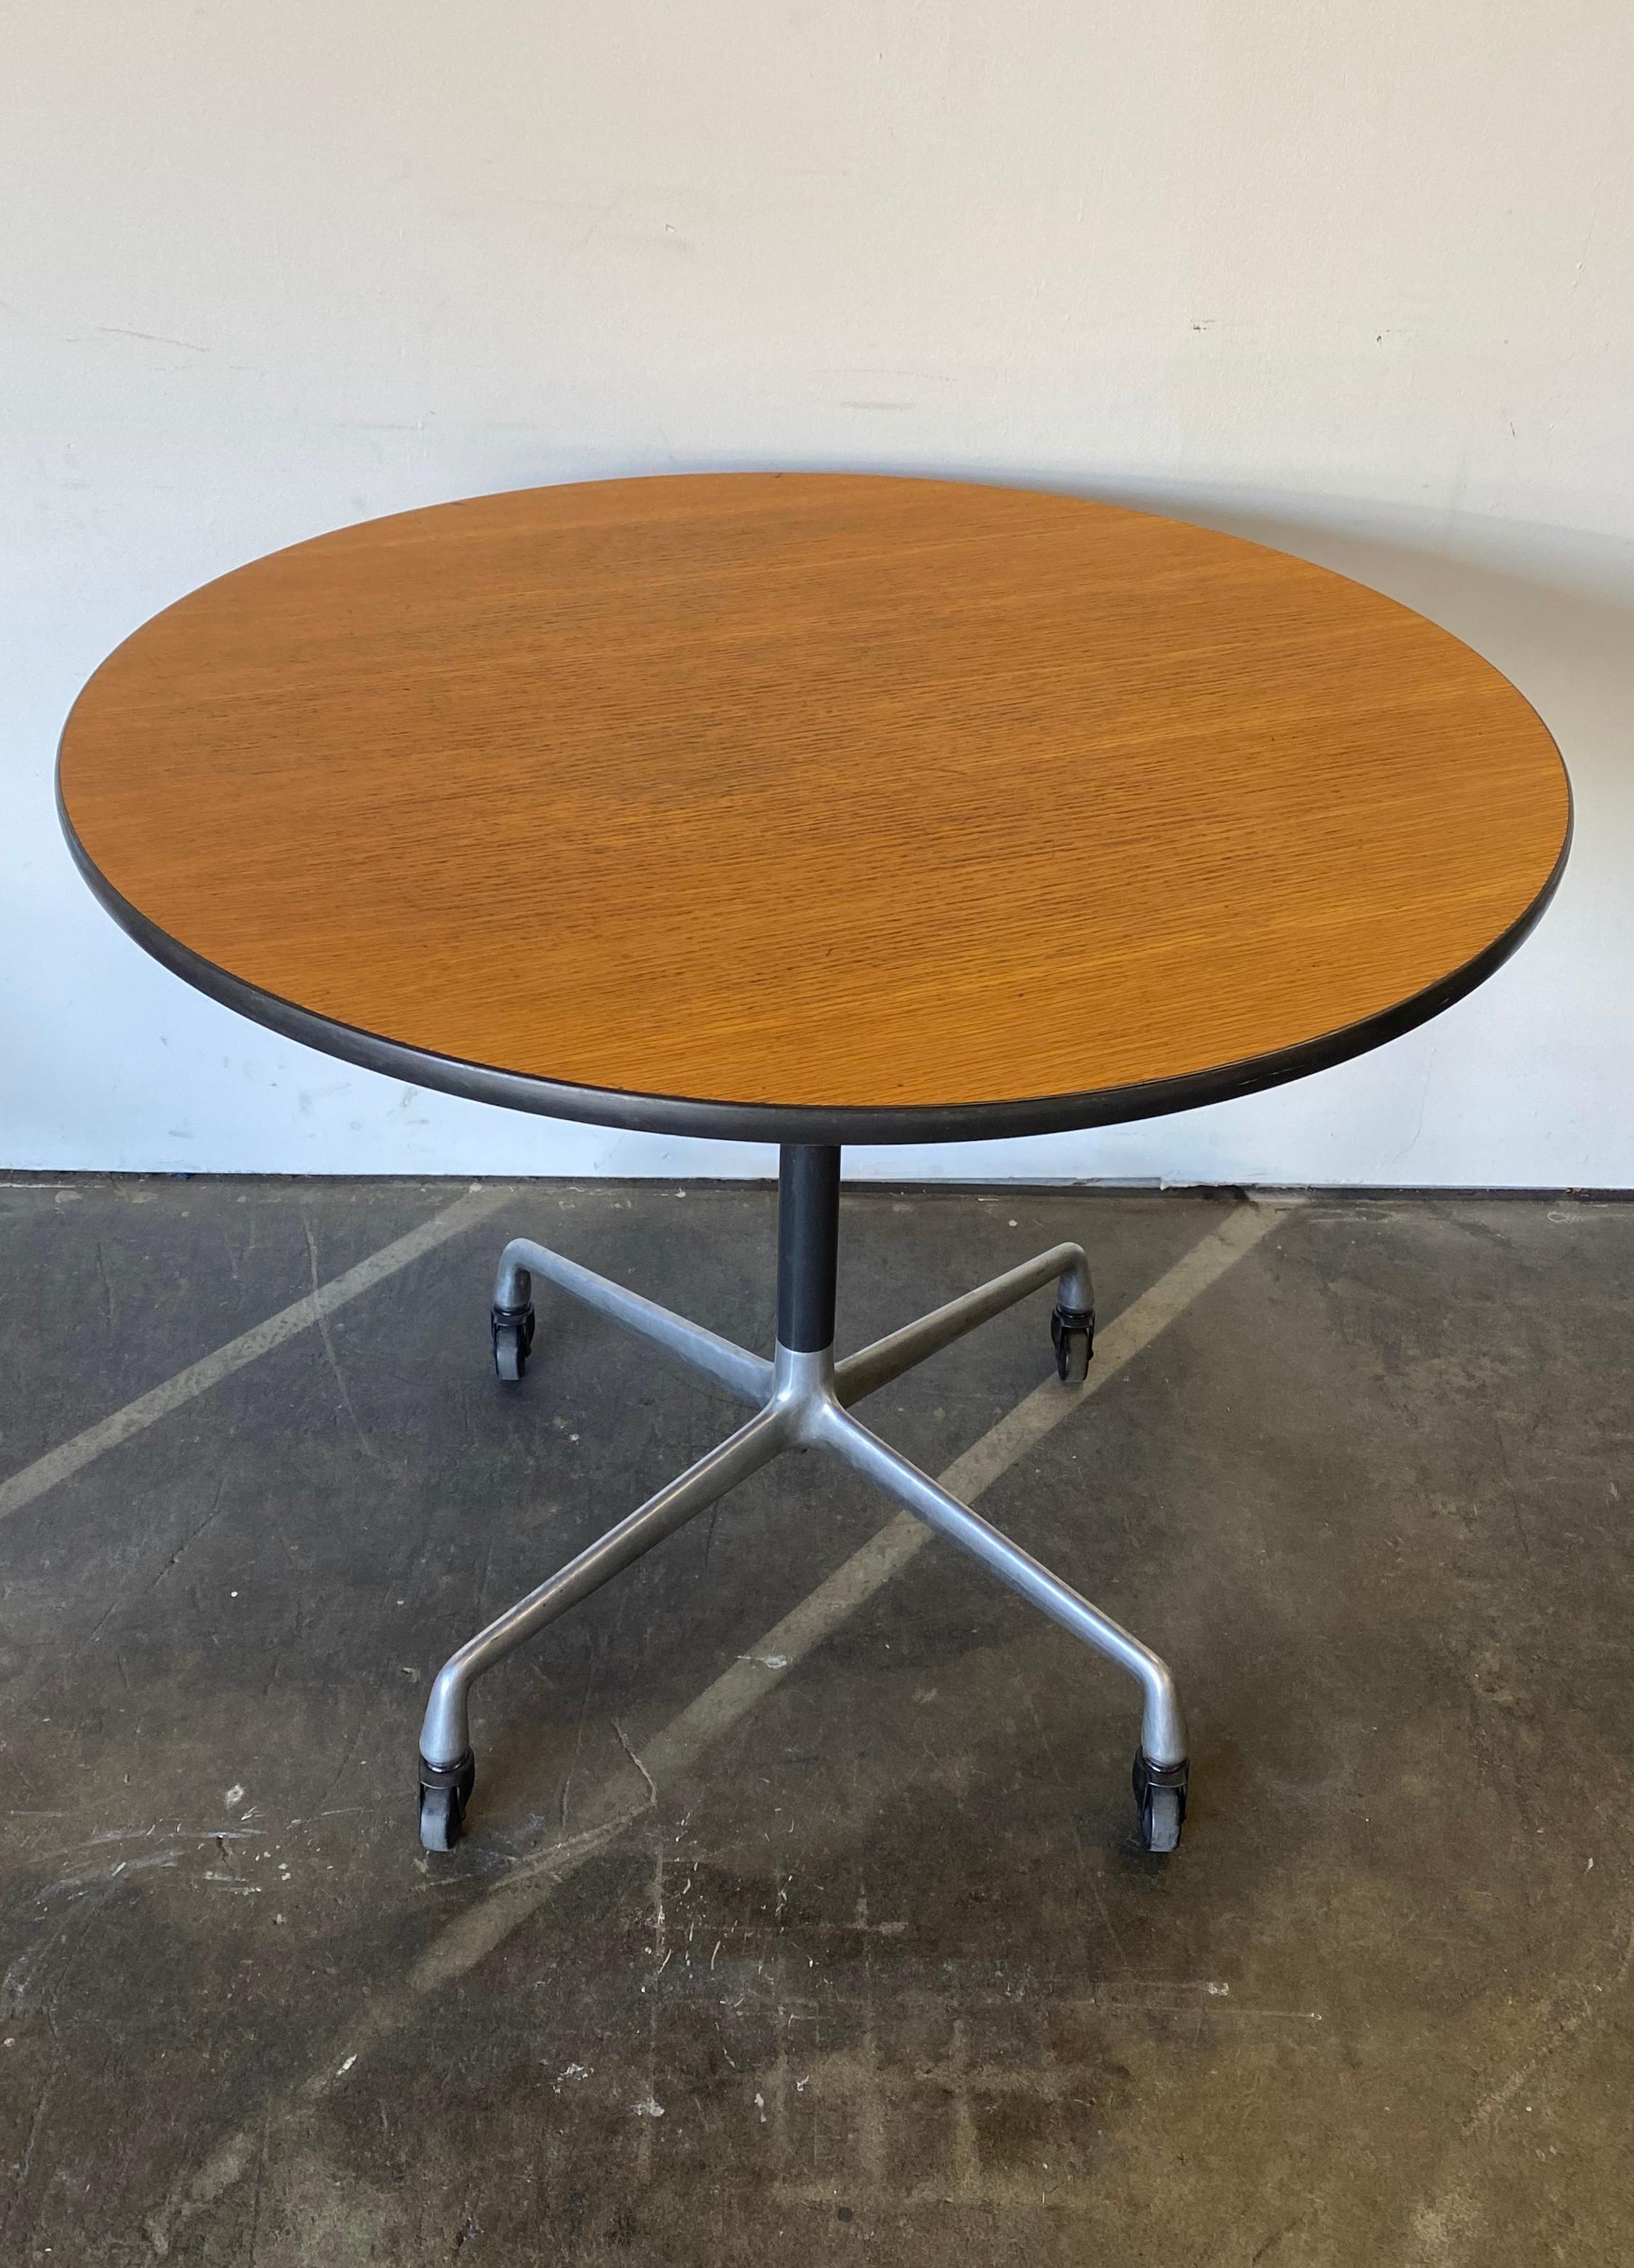 Beautiful dining table design by Charles Andrew Eames and produced by Herman Miller. 36 inches in diameter accommodates up to four dining chairs. Moves freely and easily on original casters. They are rubber for use on a variety of surfaces. Table is